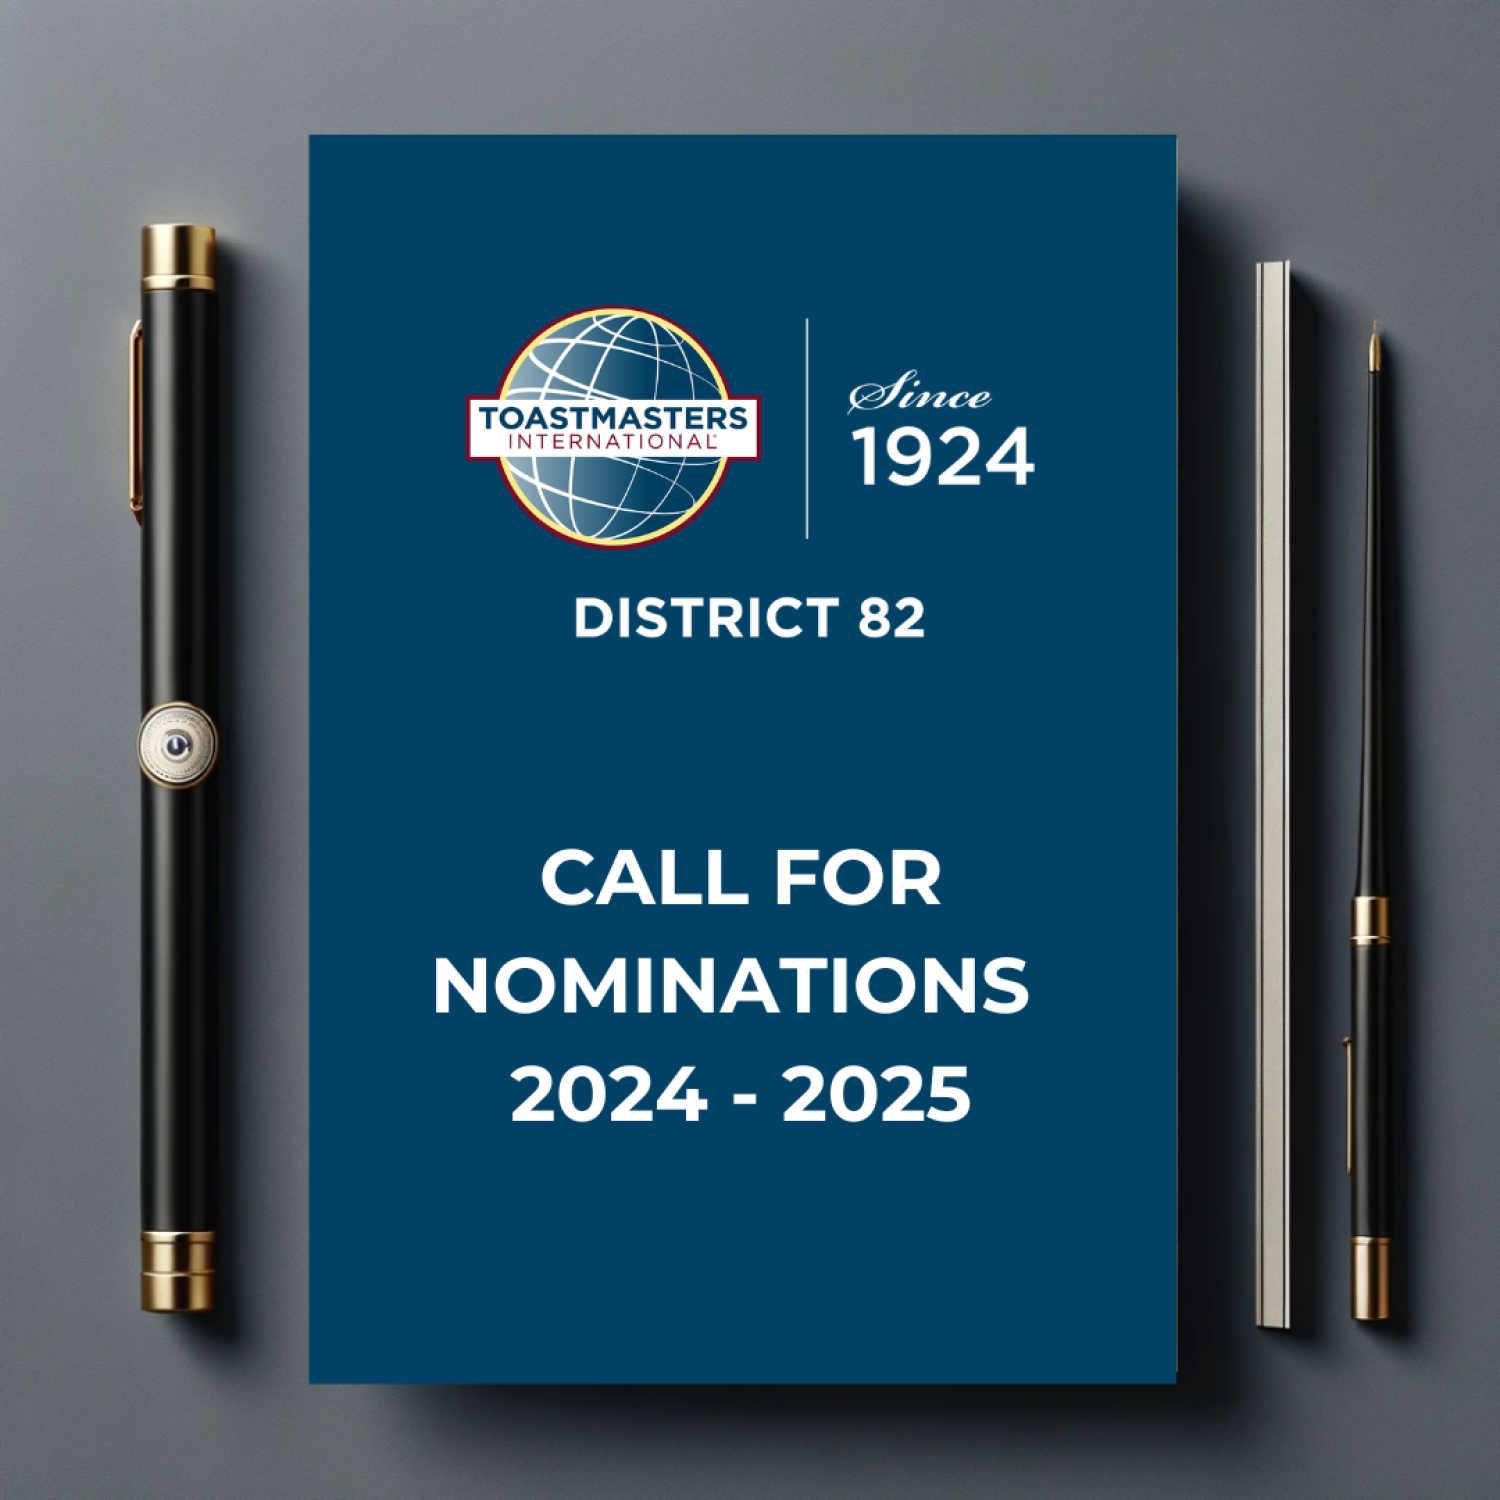 District 82 Call for nominations 2024-2025